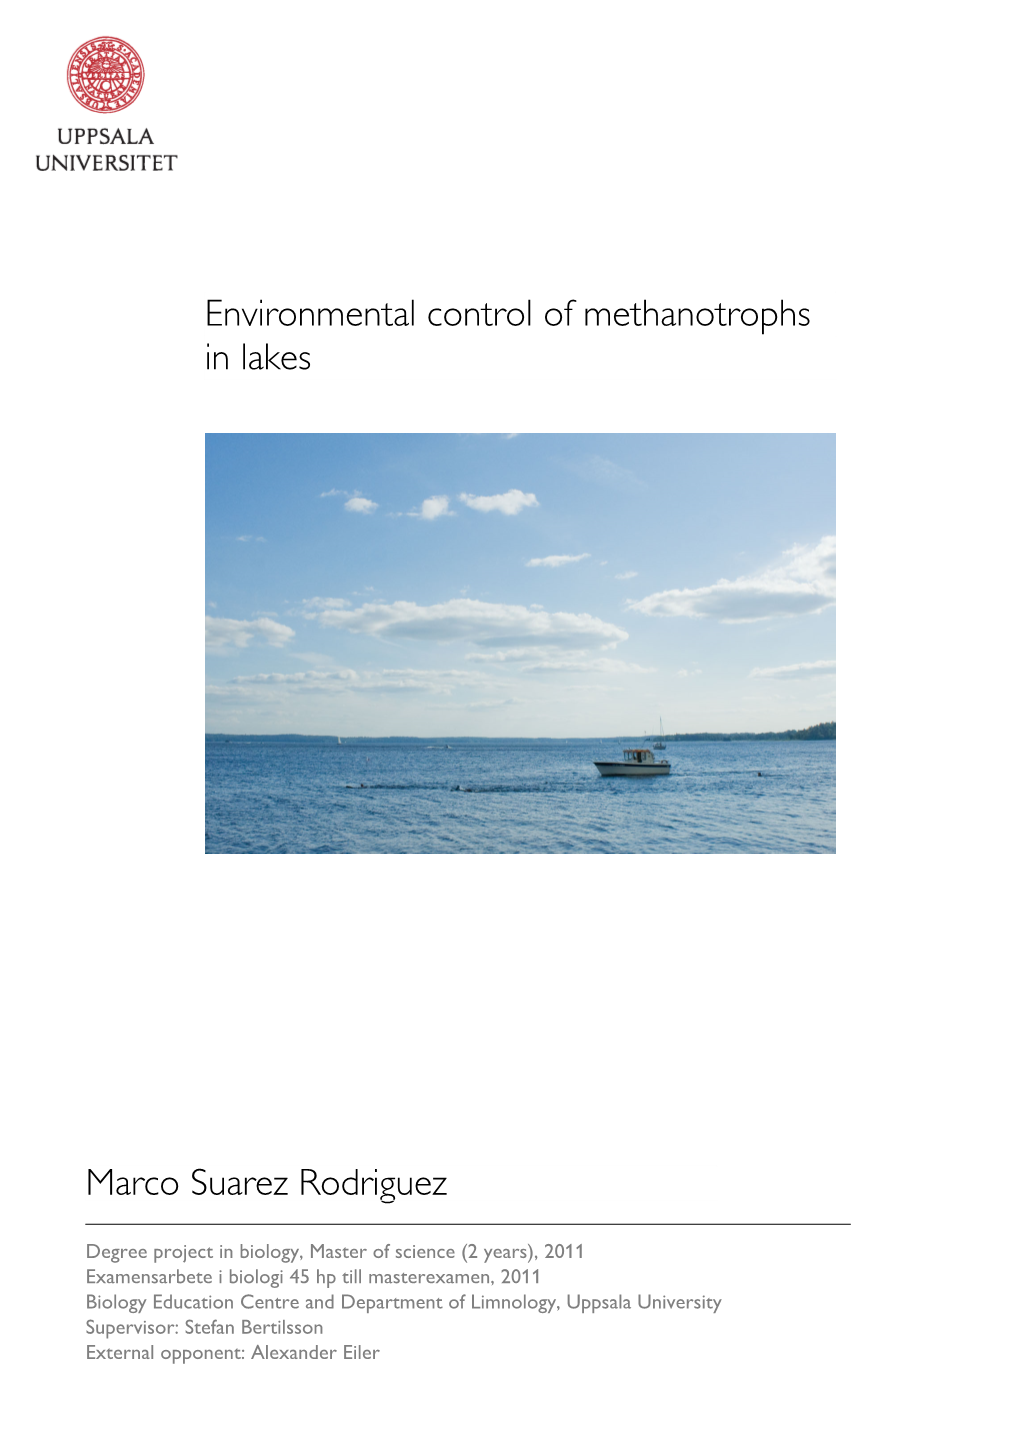 Environmental Control of Methanotrophs in Lakes Marco